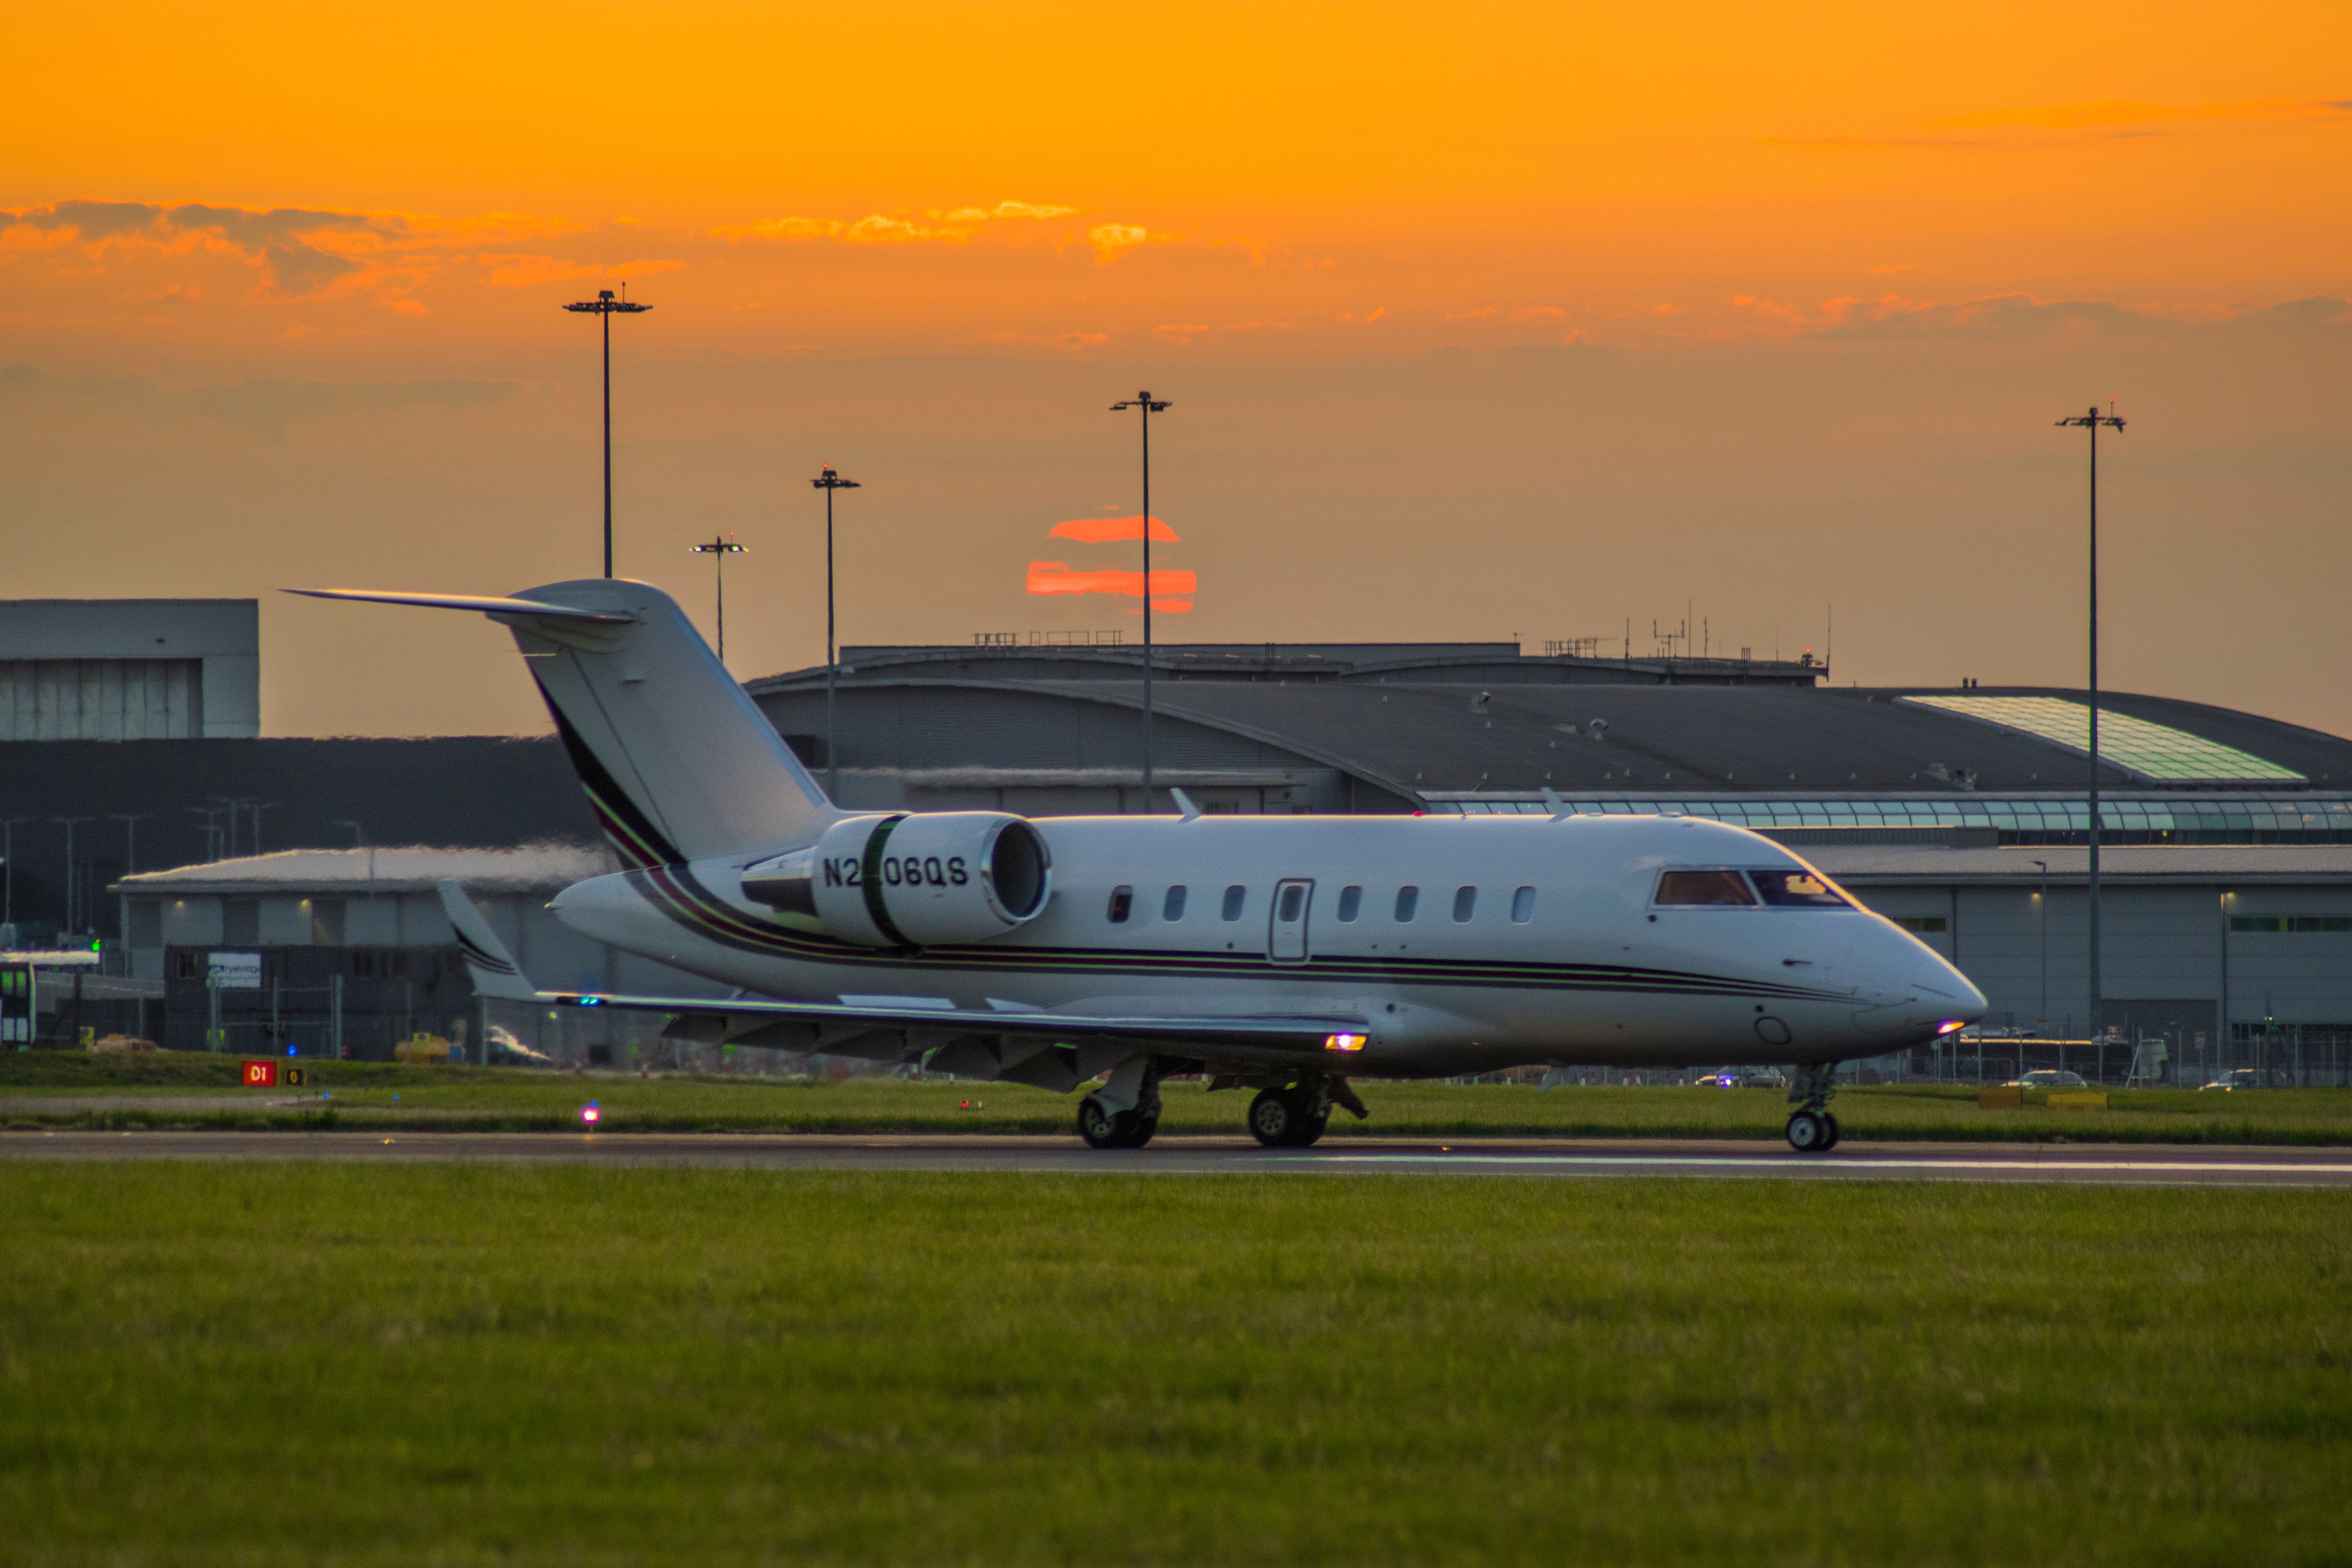 A Private Jet On The Runway At London Luton Airport.